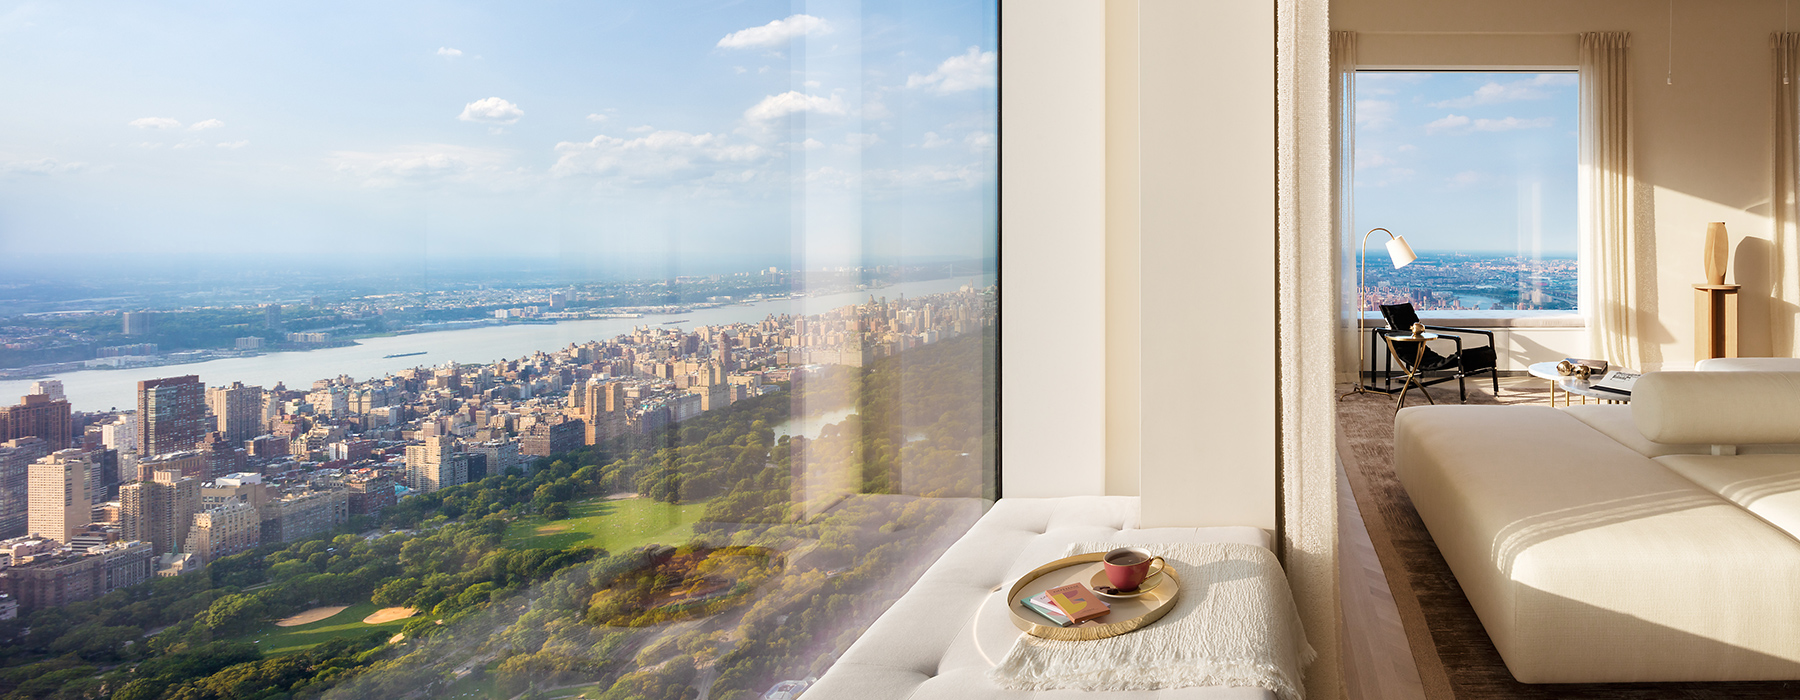 This penthouse is located in a New York building on the 86th floor, the views are stunning